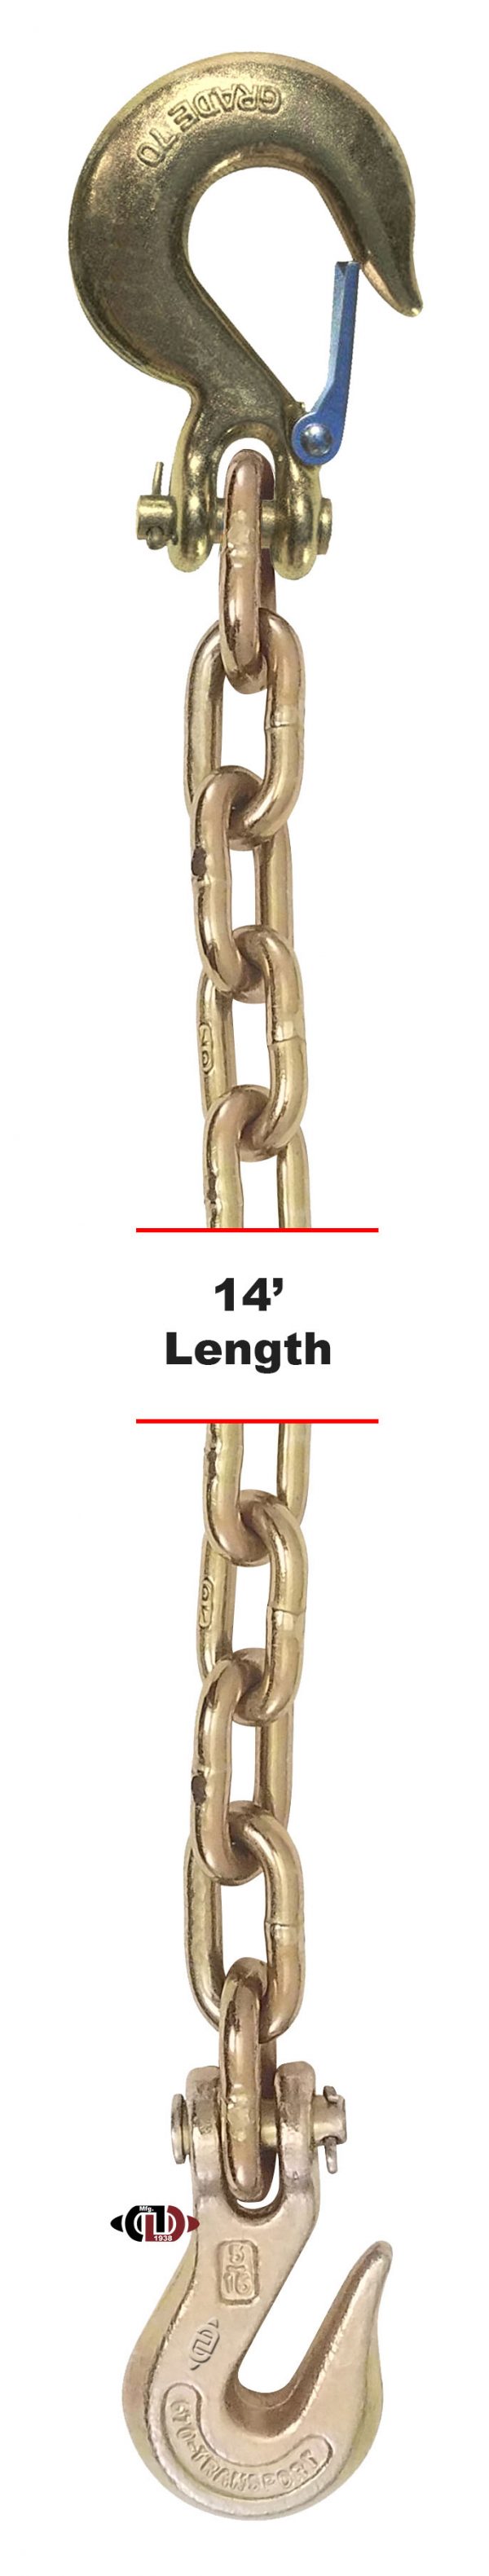 G-70 5/16" x 14' Chain with Grab Hook One End & Slip Hook One End DBC-516x14-G7-CSCGH